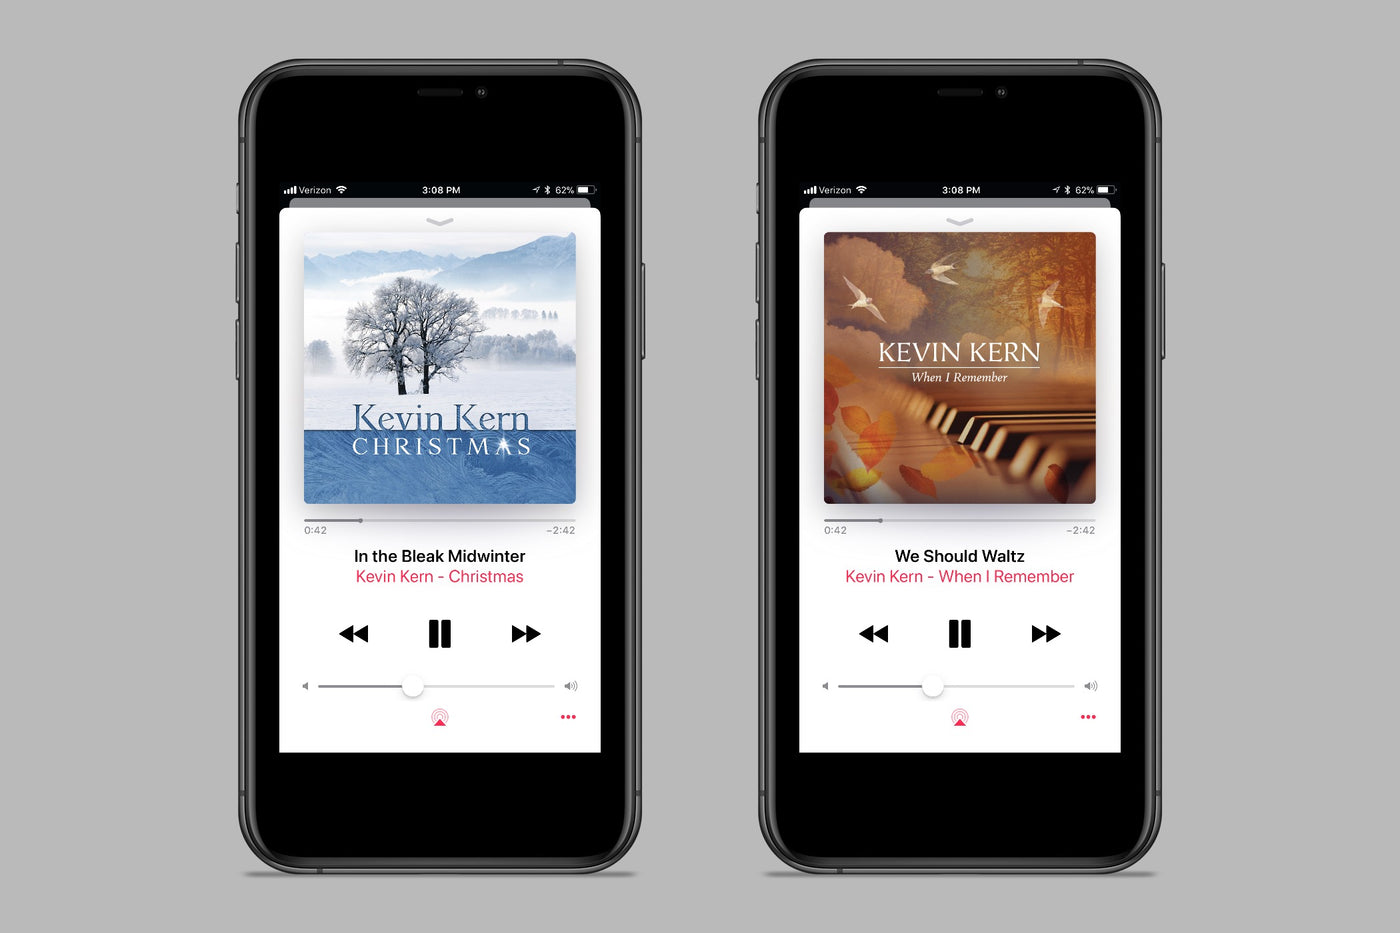 2 smartphones displaying digital albums by Kevin Kern - Christmas and When I Remember.